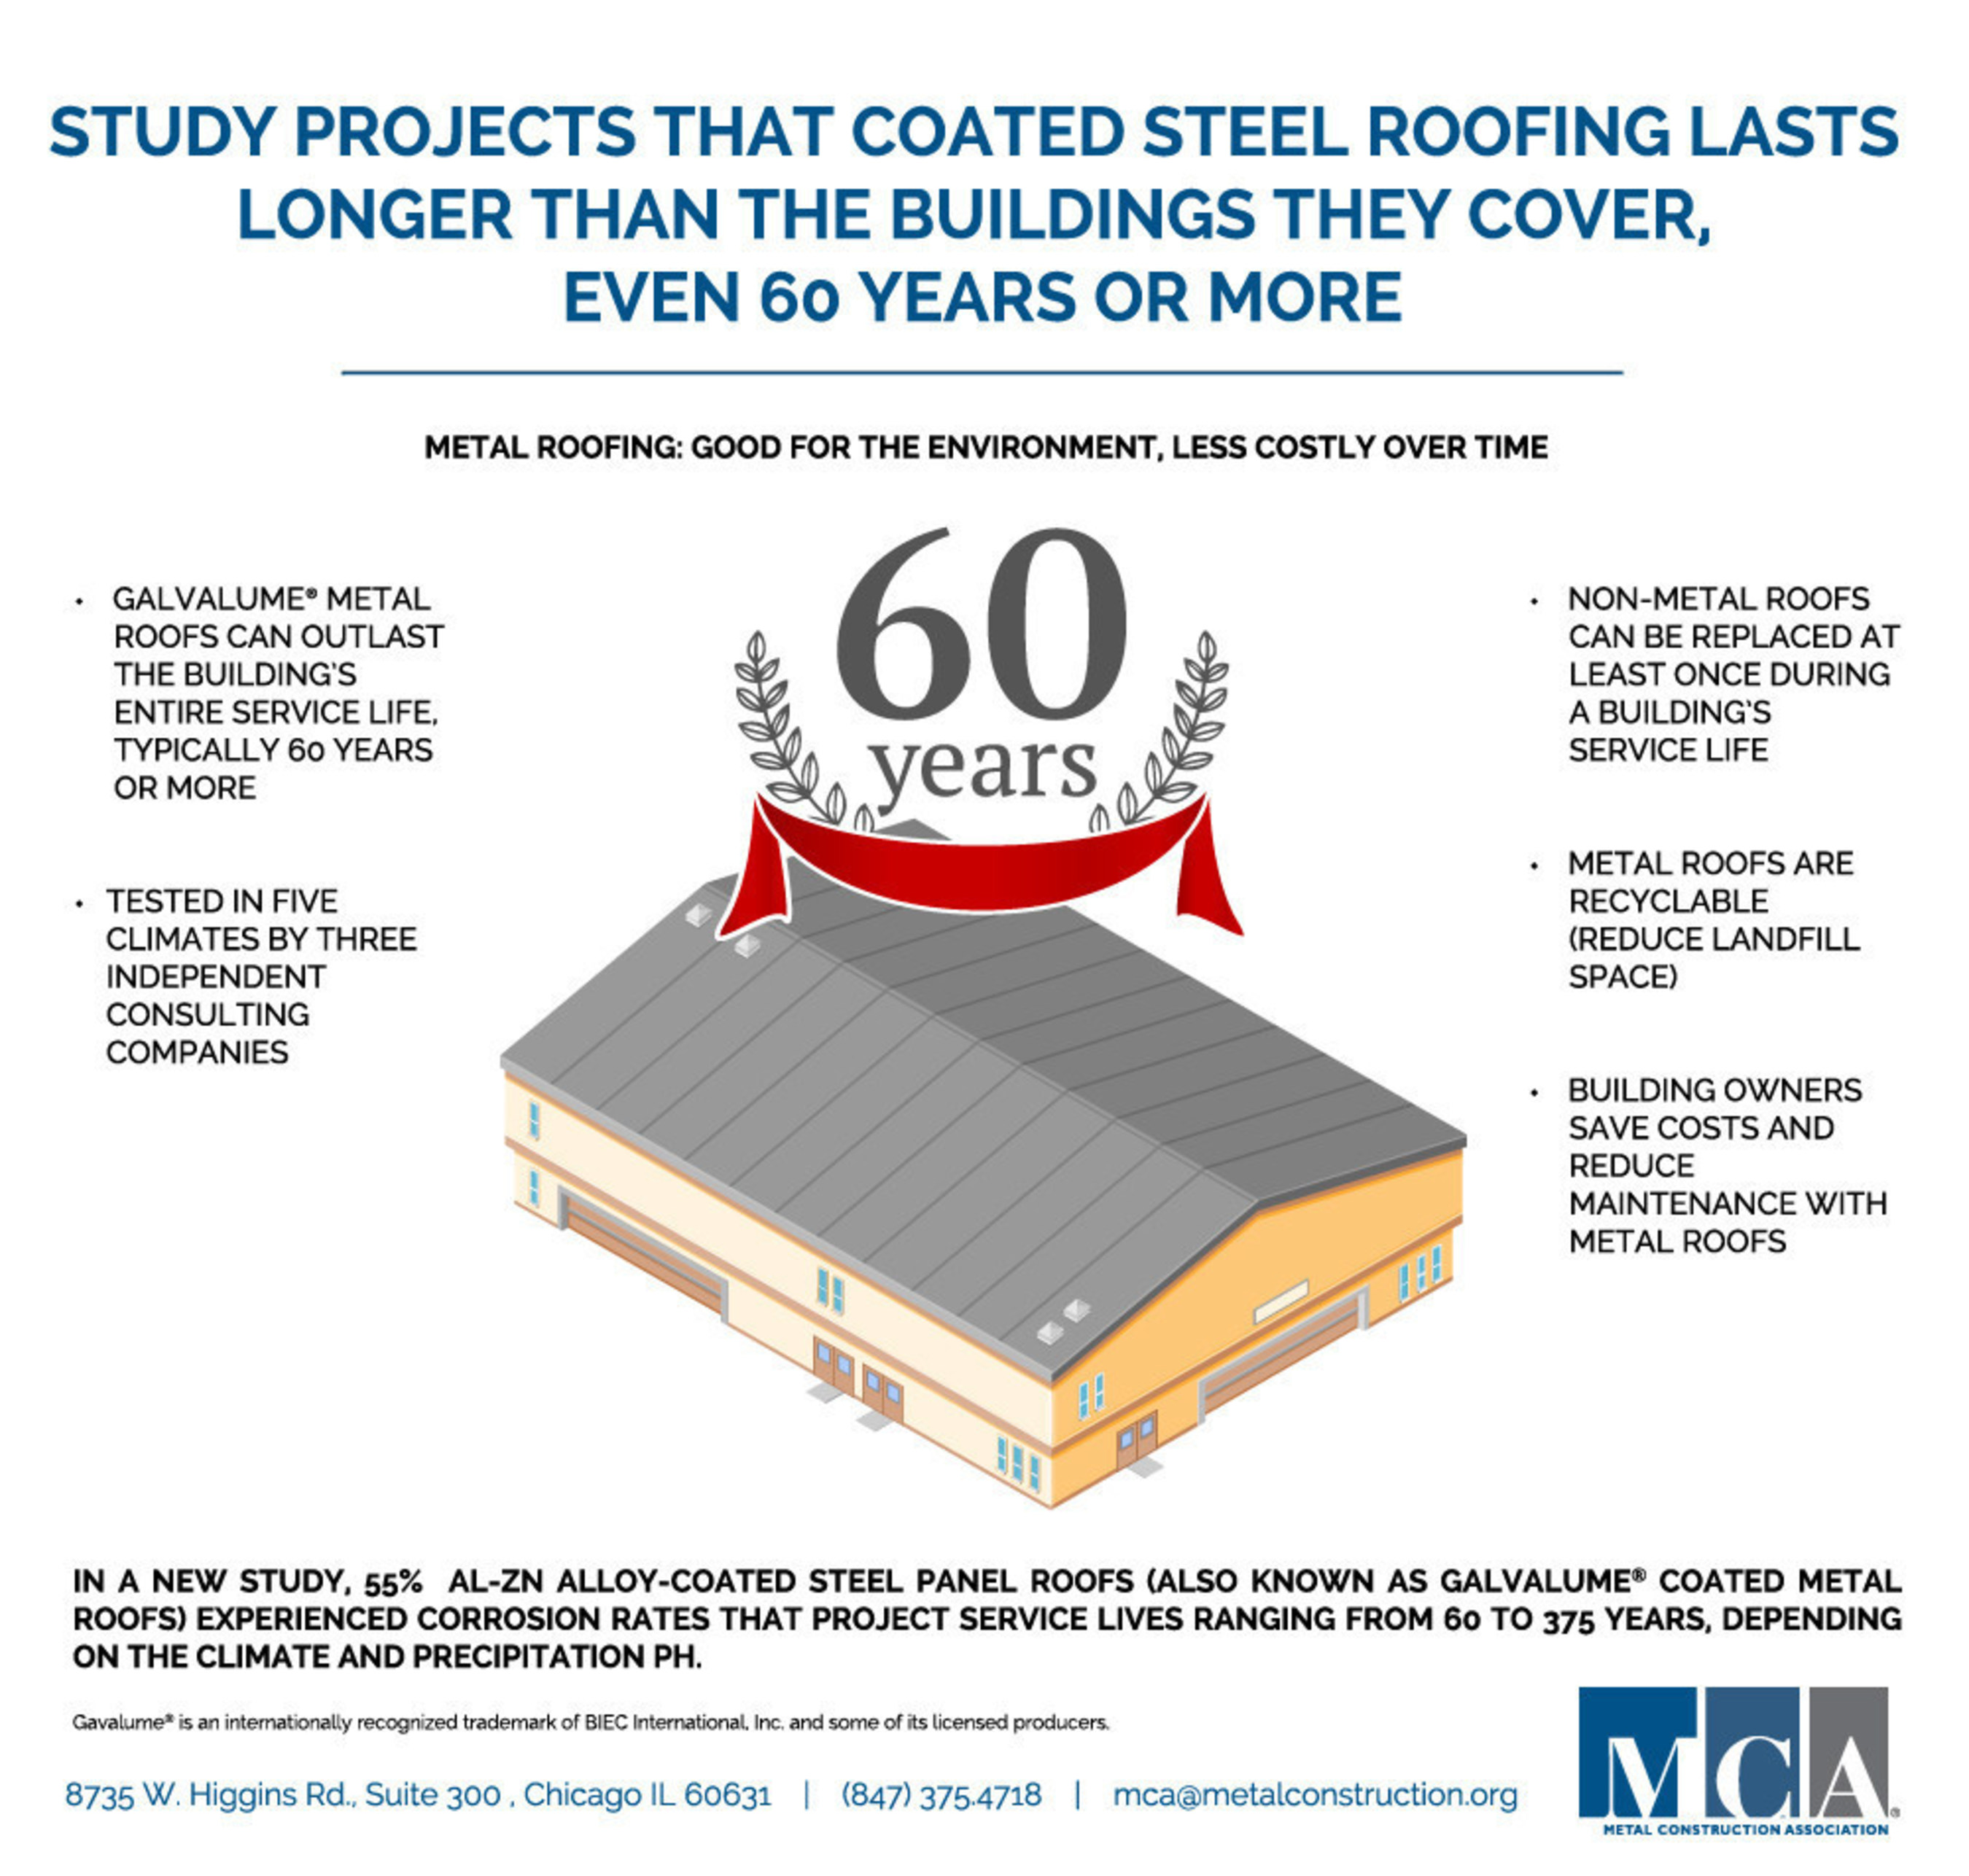 Good news for the environment: new study verifies that steel roofs lasts longer than the buildings they cover, typically 60 years or more.